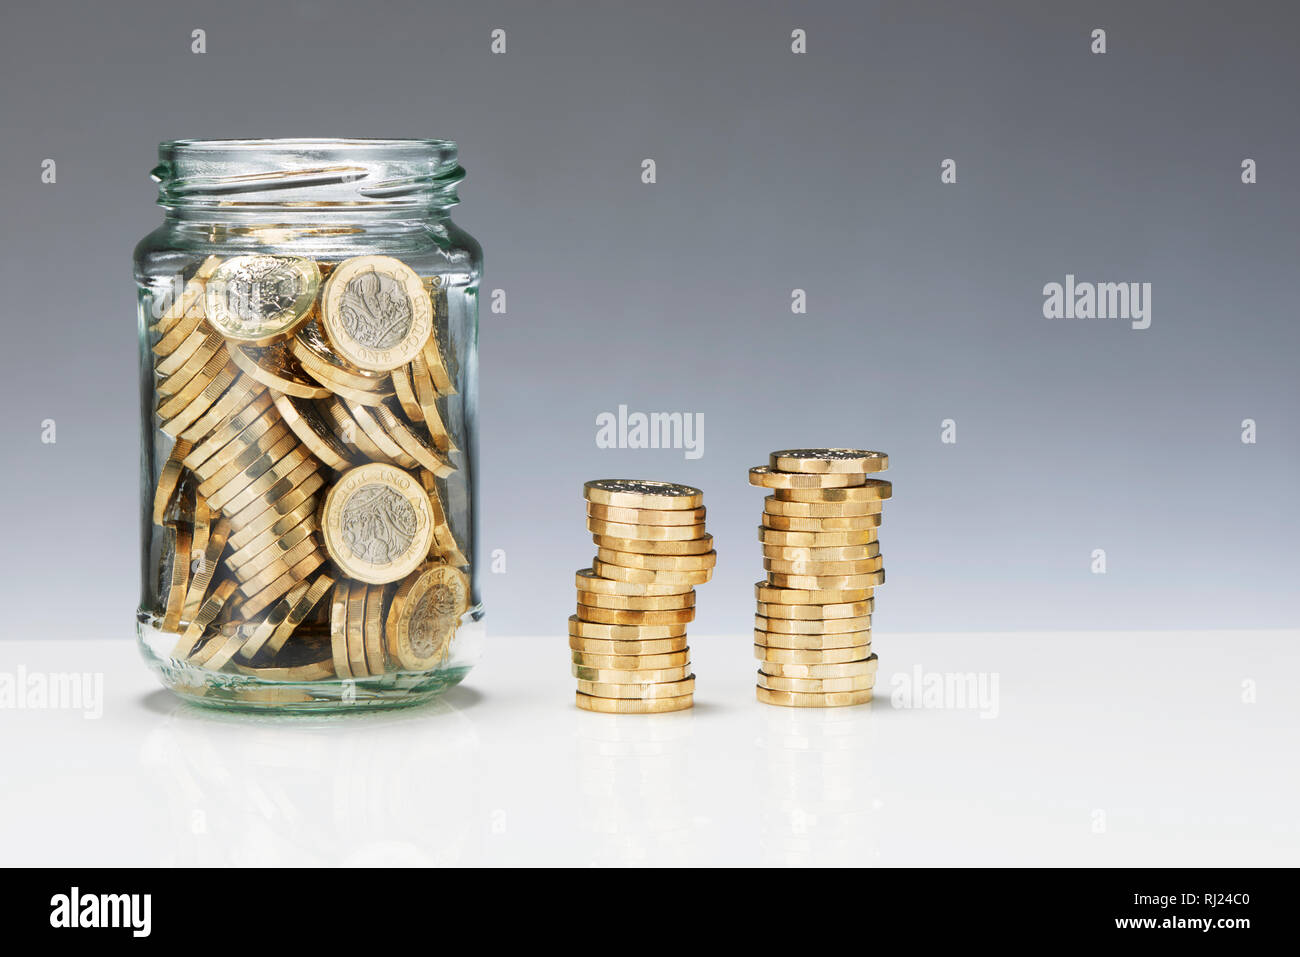 Glass Savings Jar with One Pound Coins Stock Photo